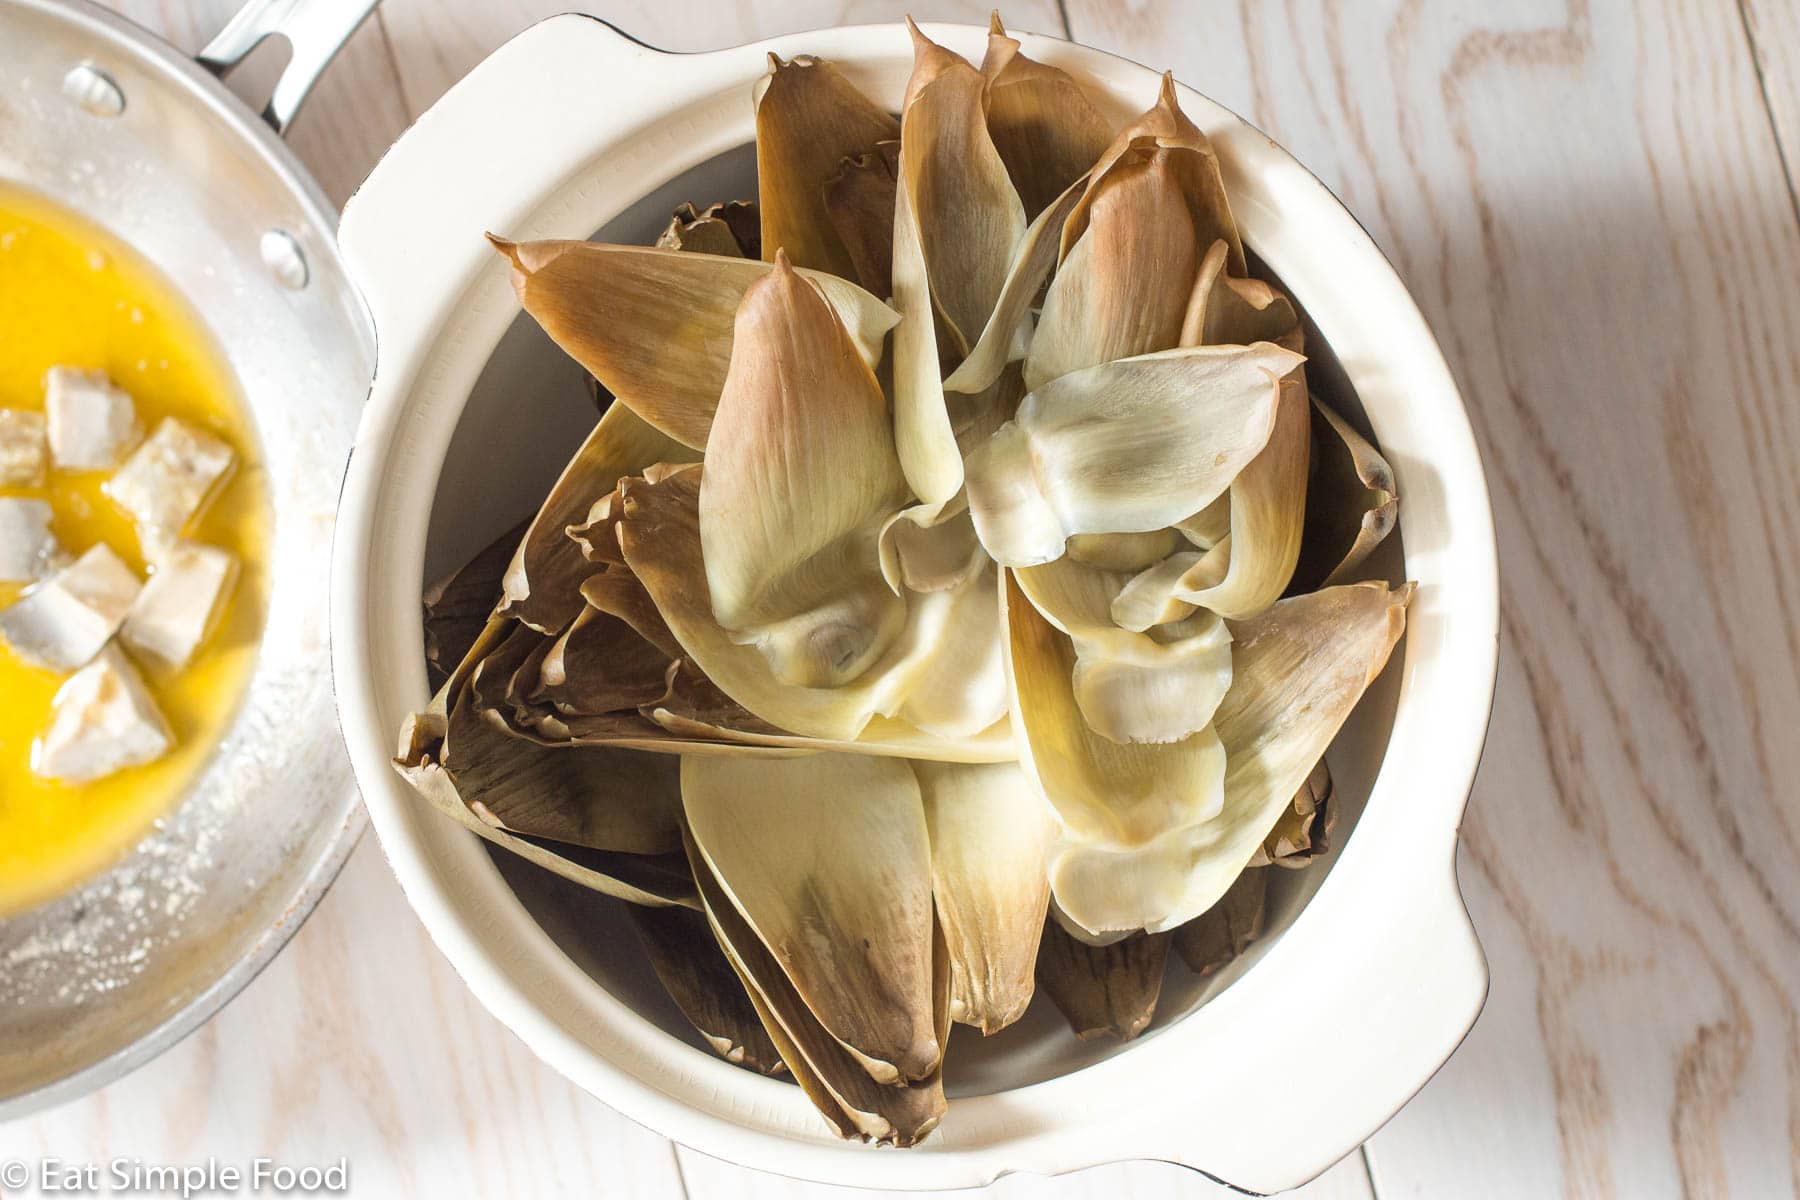 Edible cooked artichoke leaves in a white bowl. Small saucepan of diced artichoke hearts marinating in butter on the side. Top view.